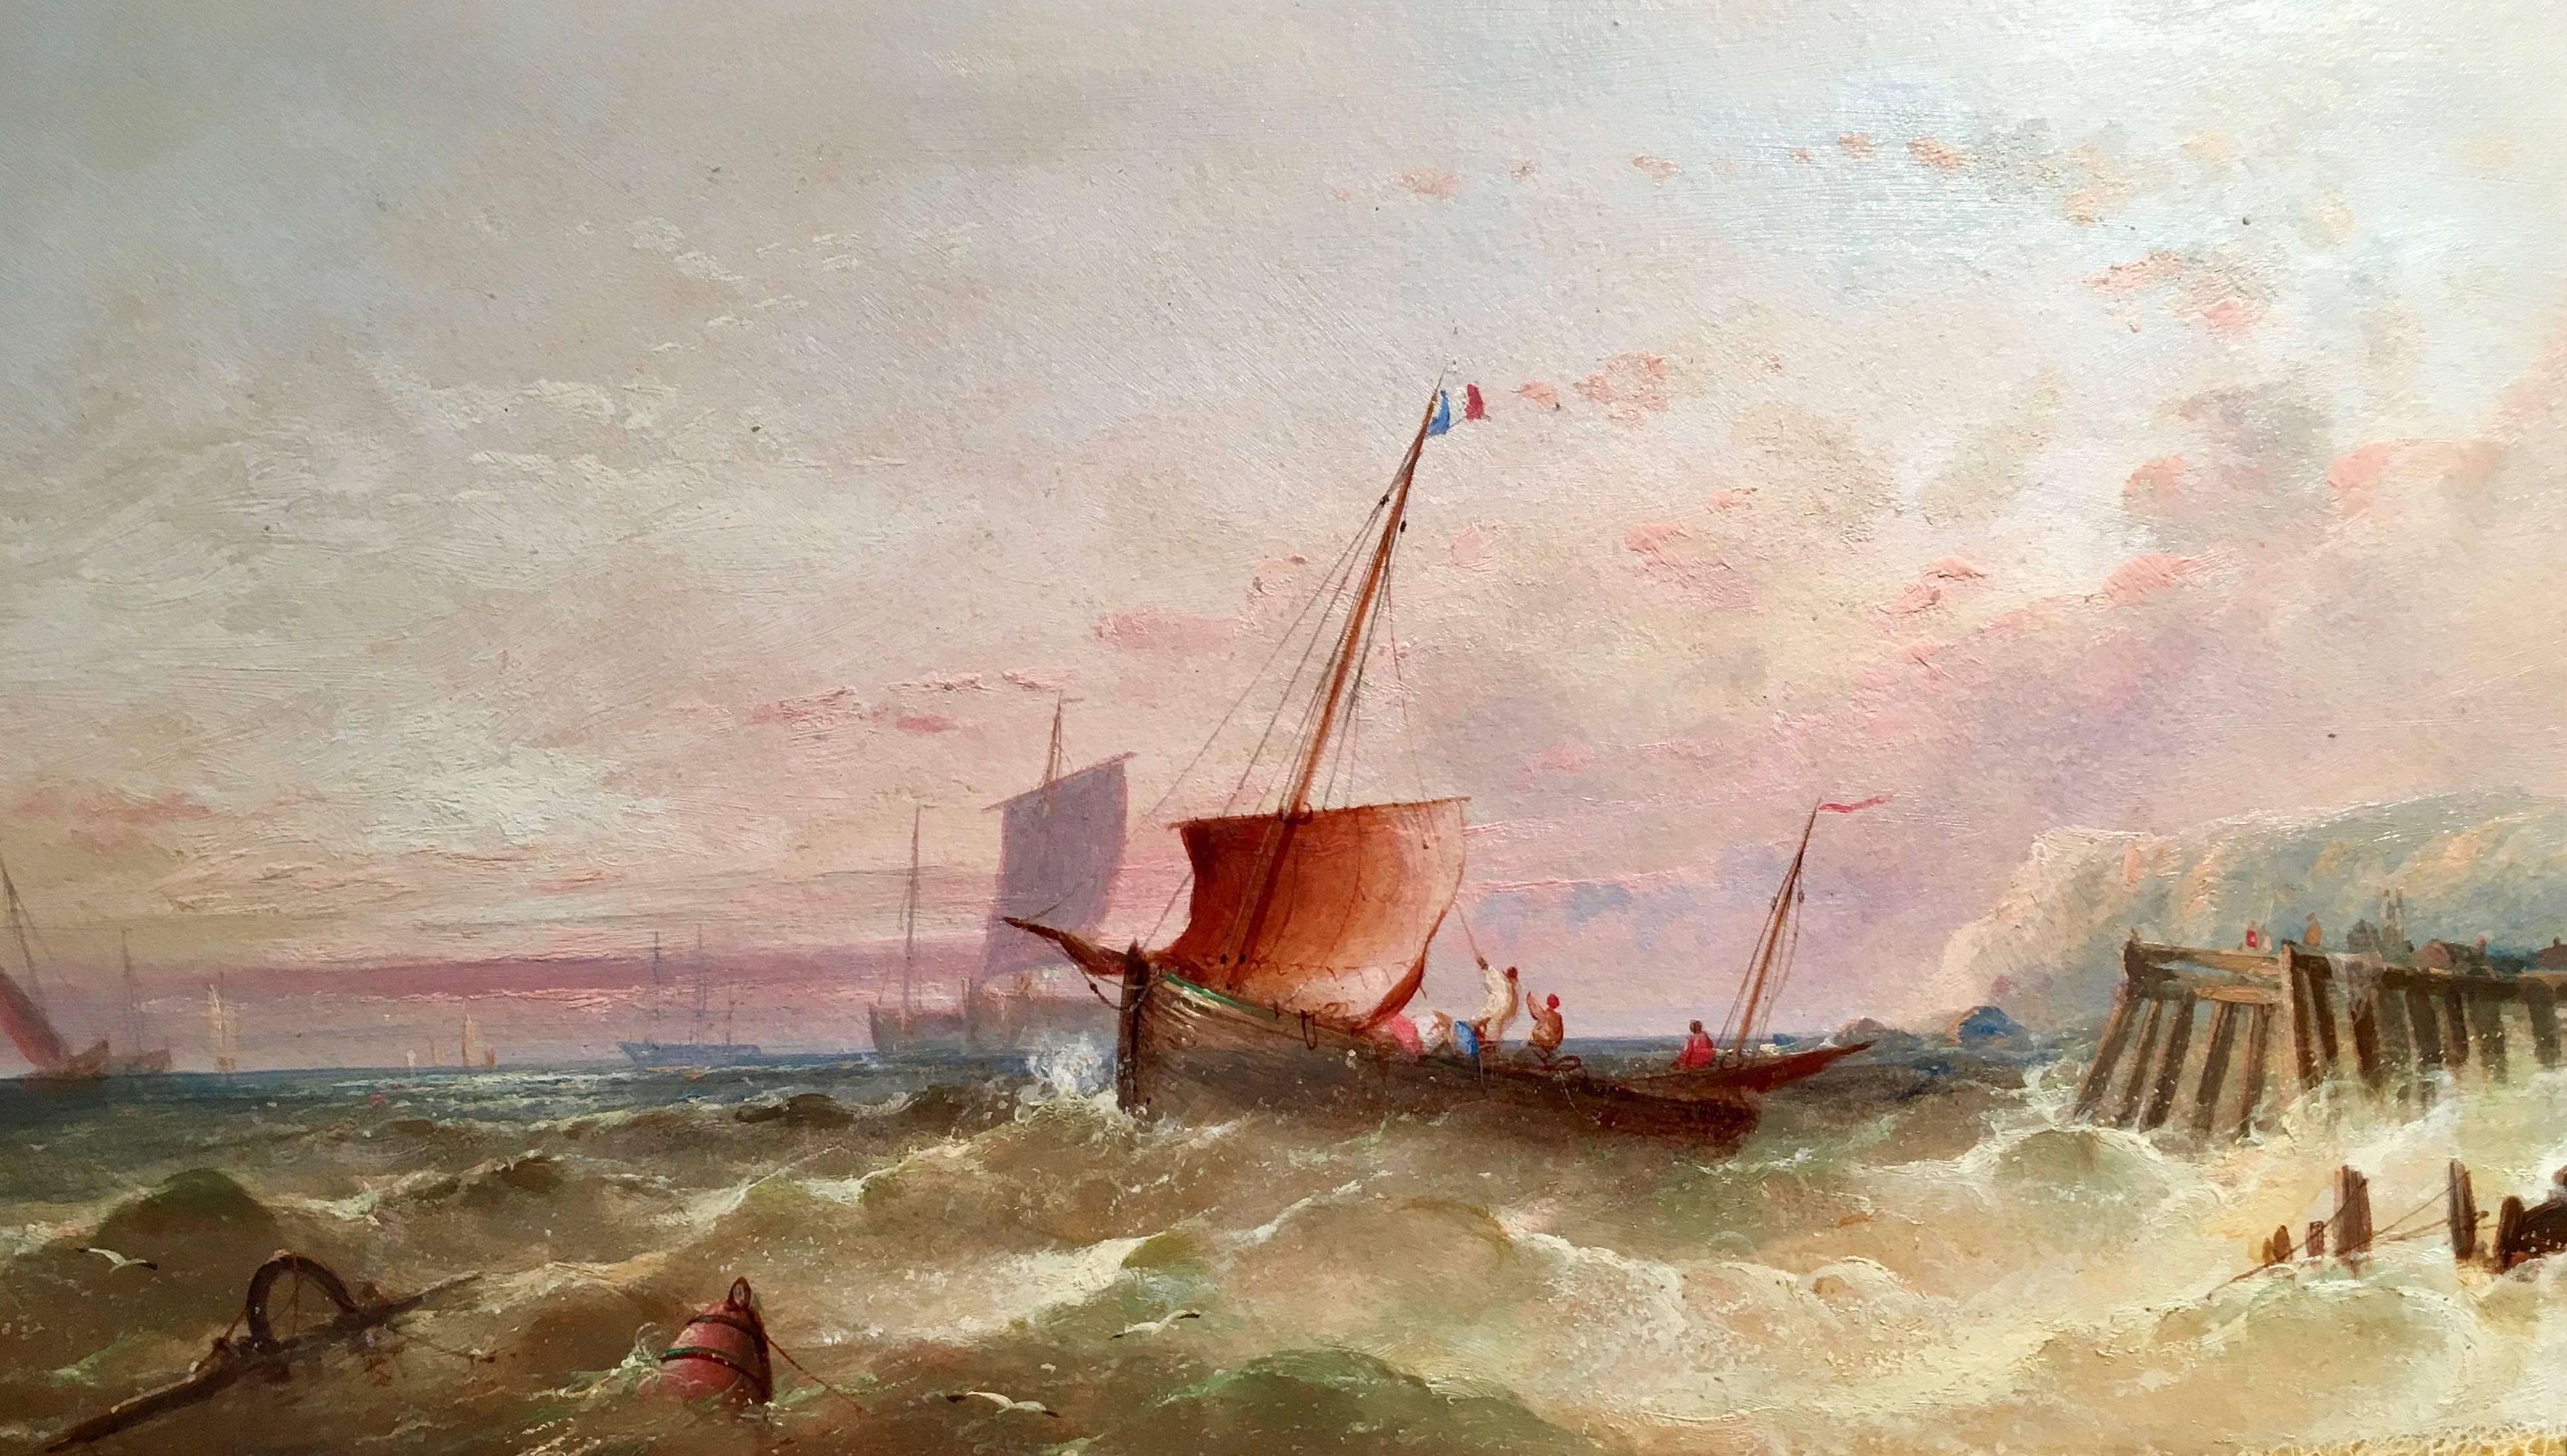 English fishing vessels in a Rough Sea - Painting by William Henry Williamson